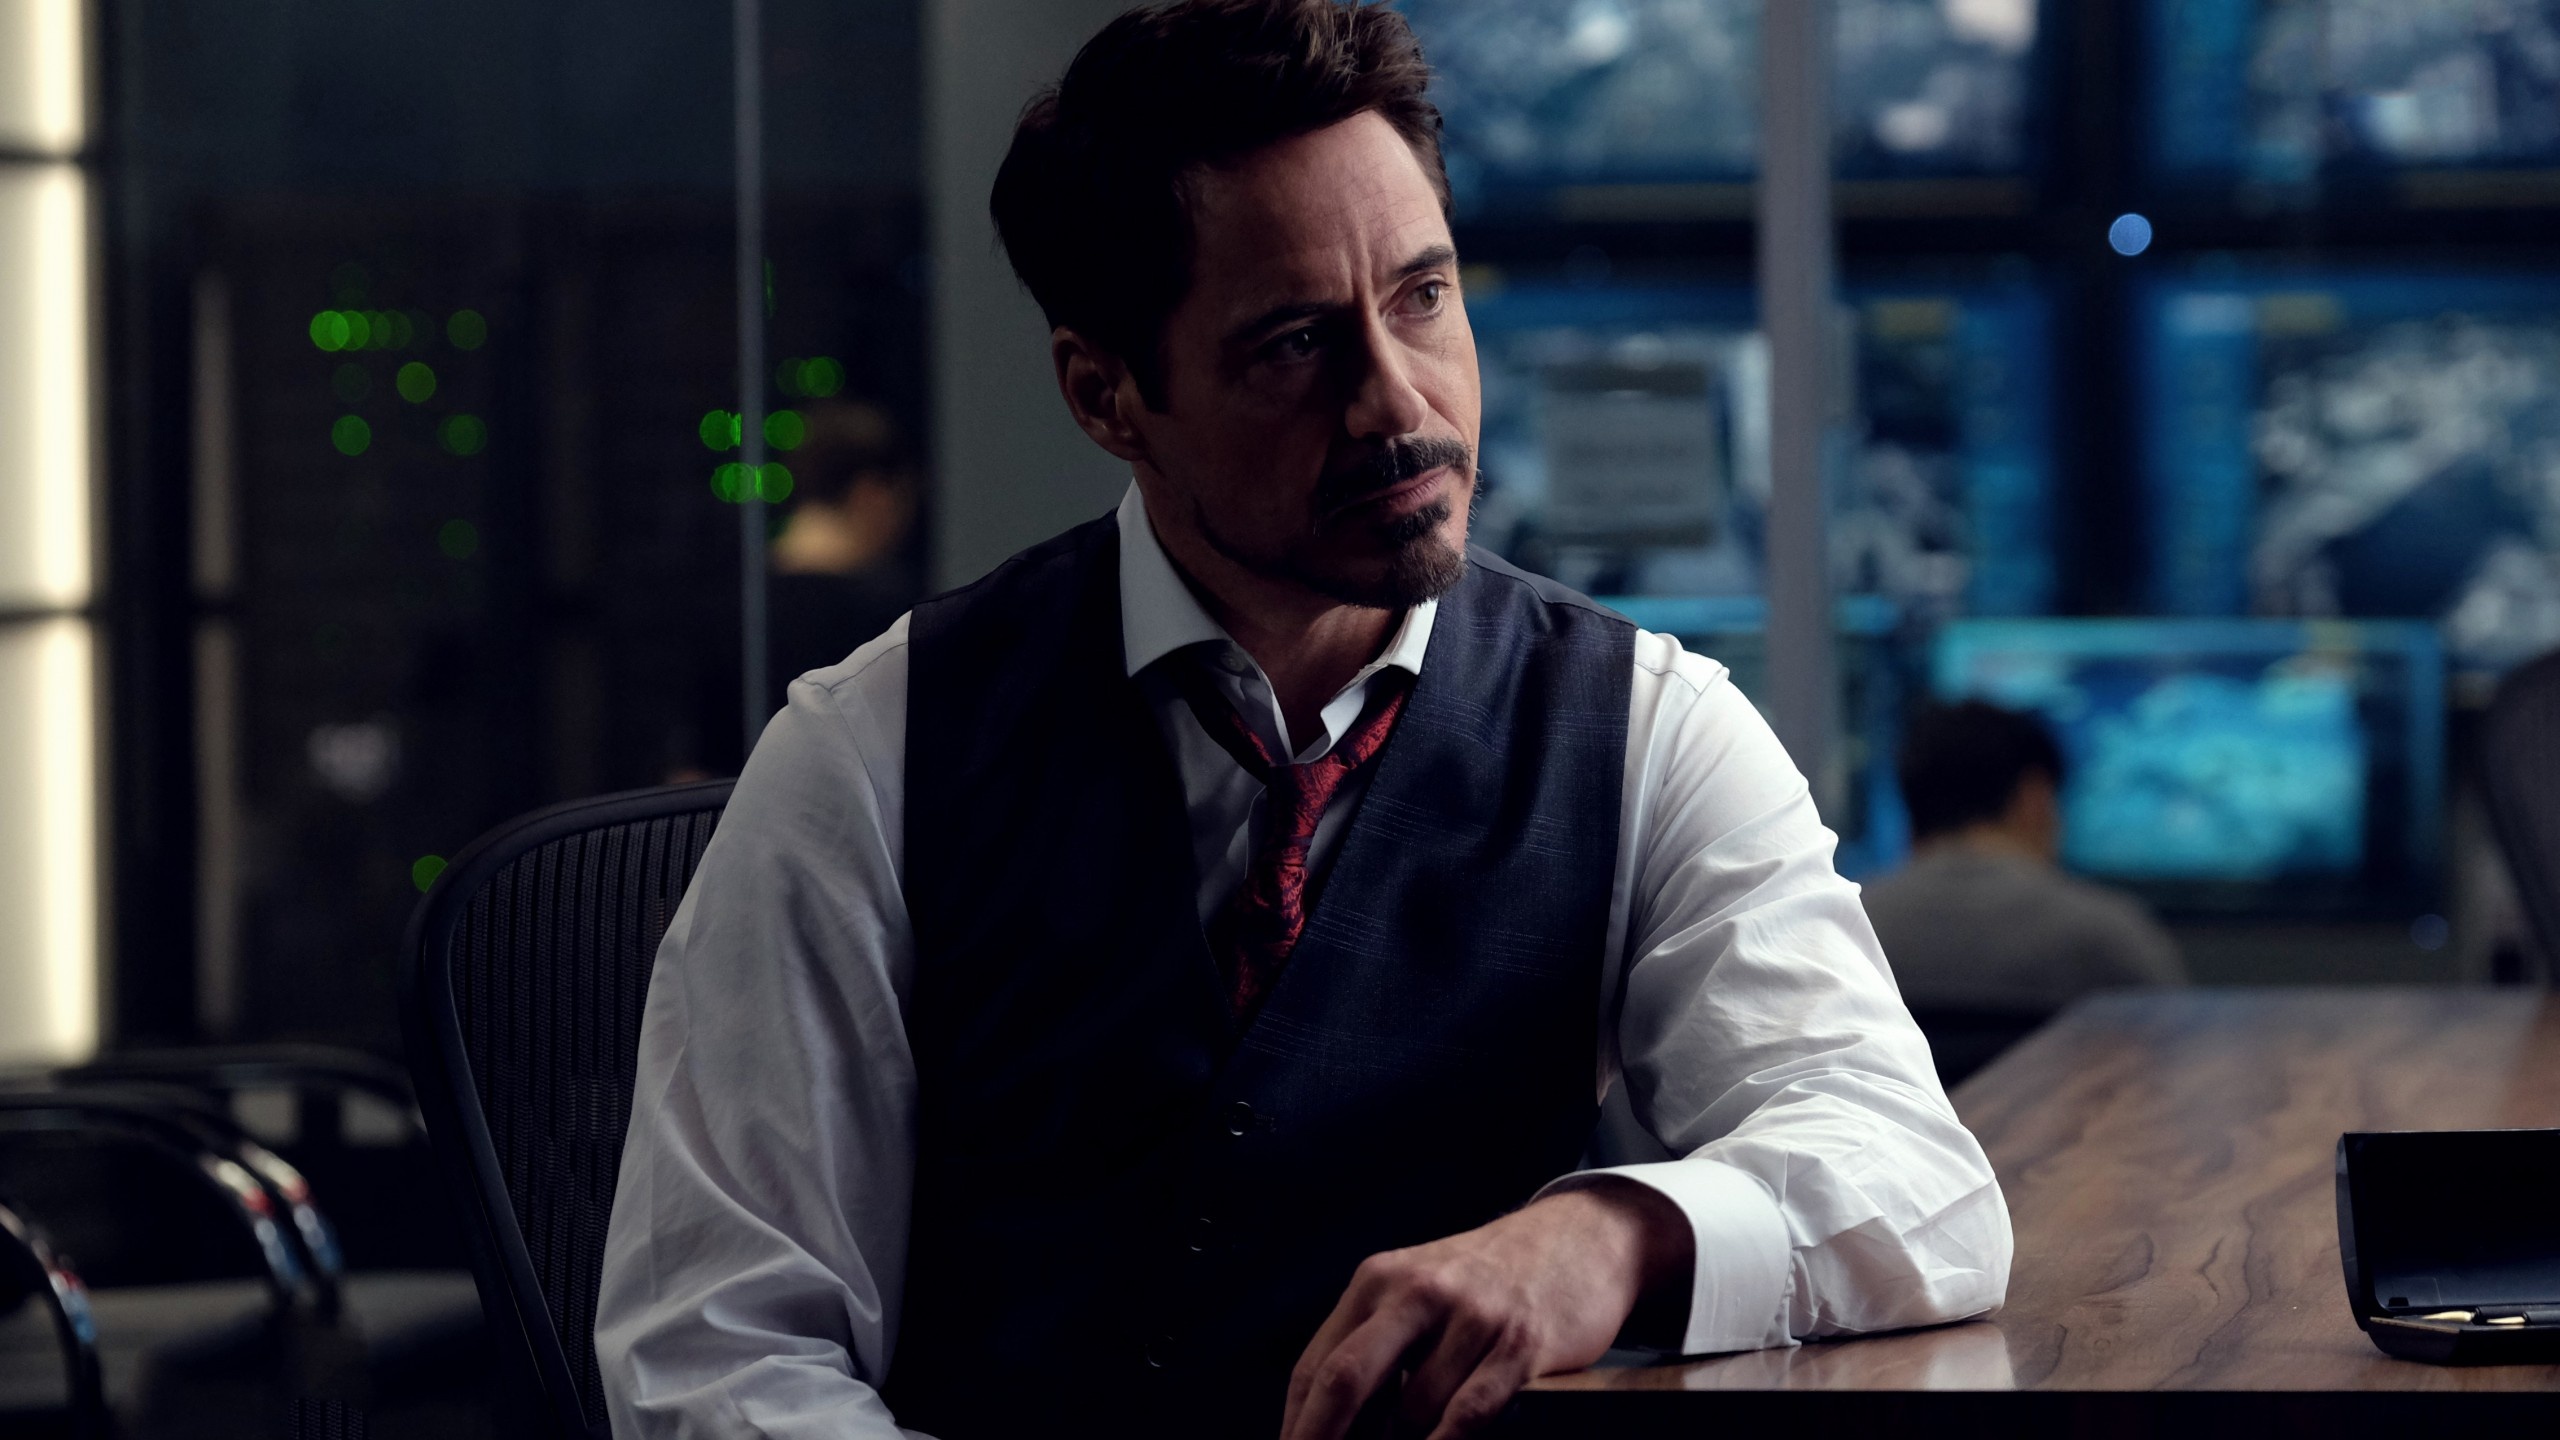 Robert Downey Jr.: An actor who gained global recognition for starring in Avengers: Infinity War. 2560x1440 HD Wallpaper.